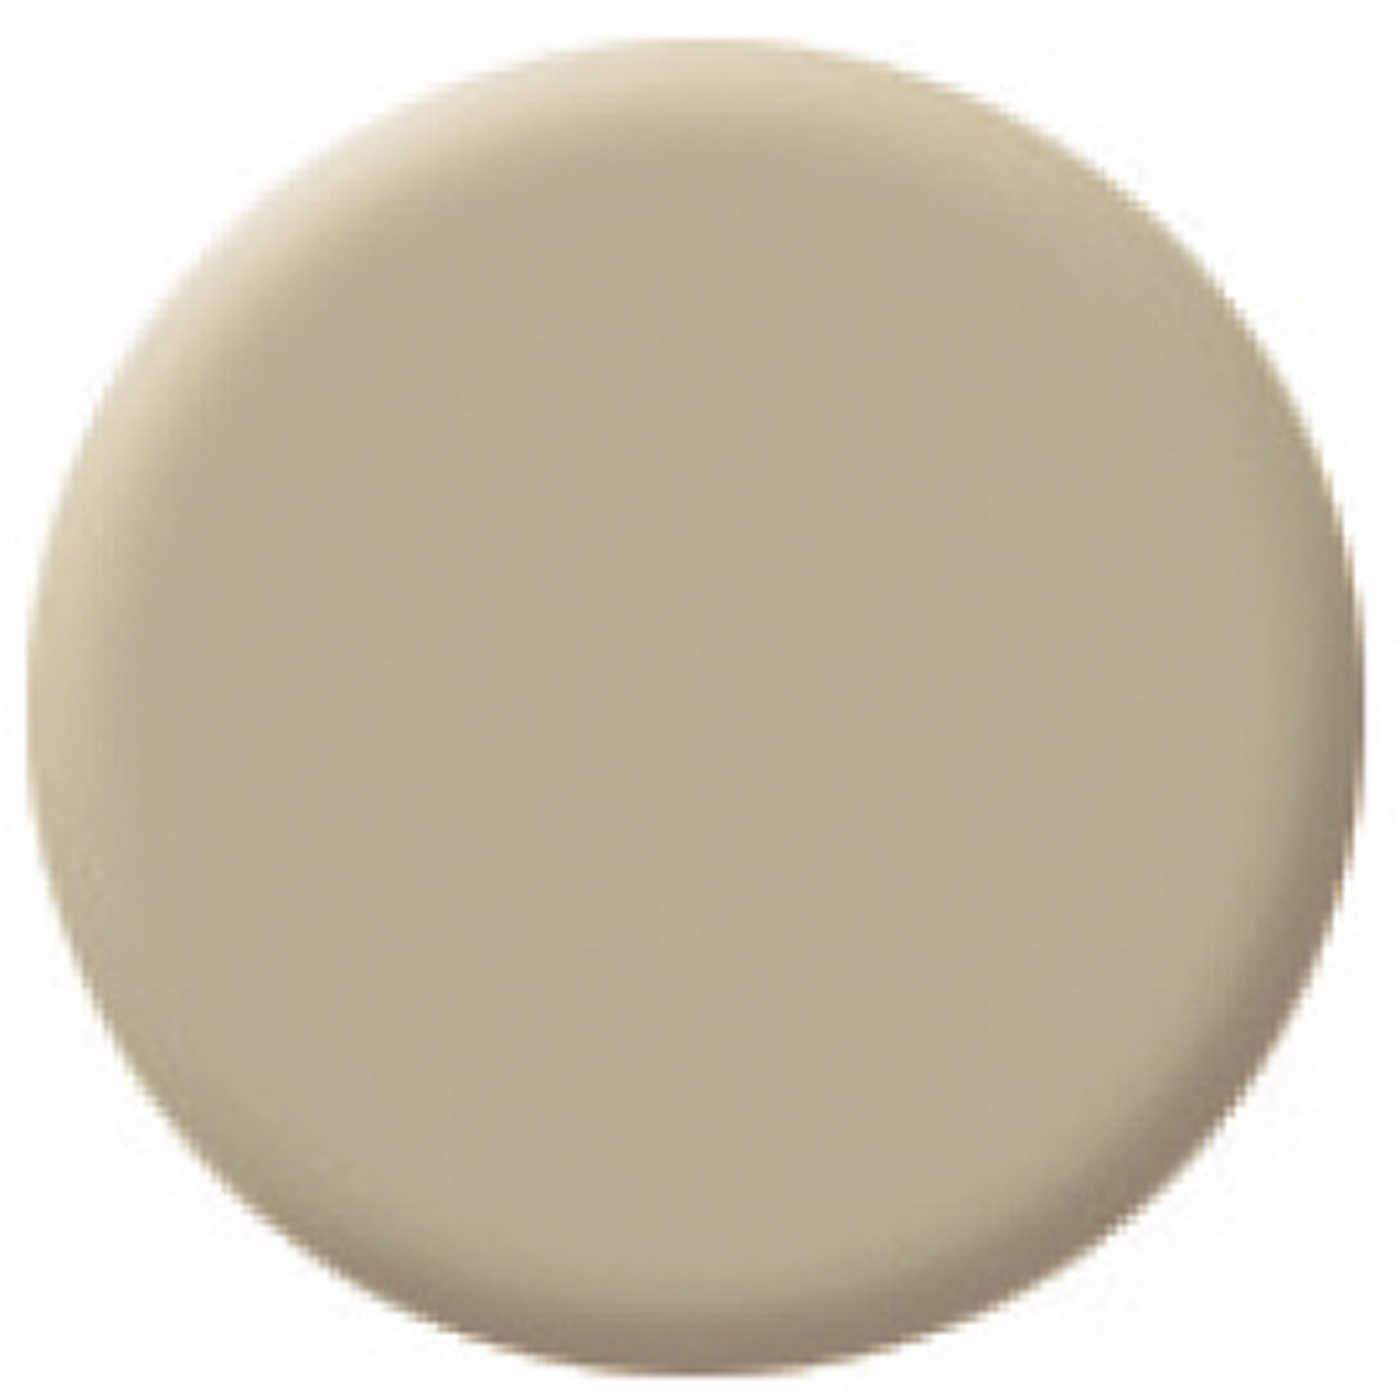 Colorit Trend opaque, coffee latte - 5 g